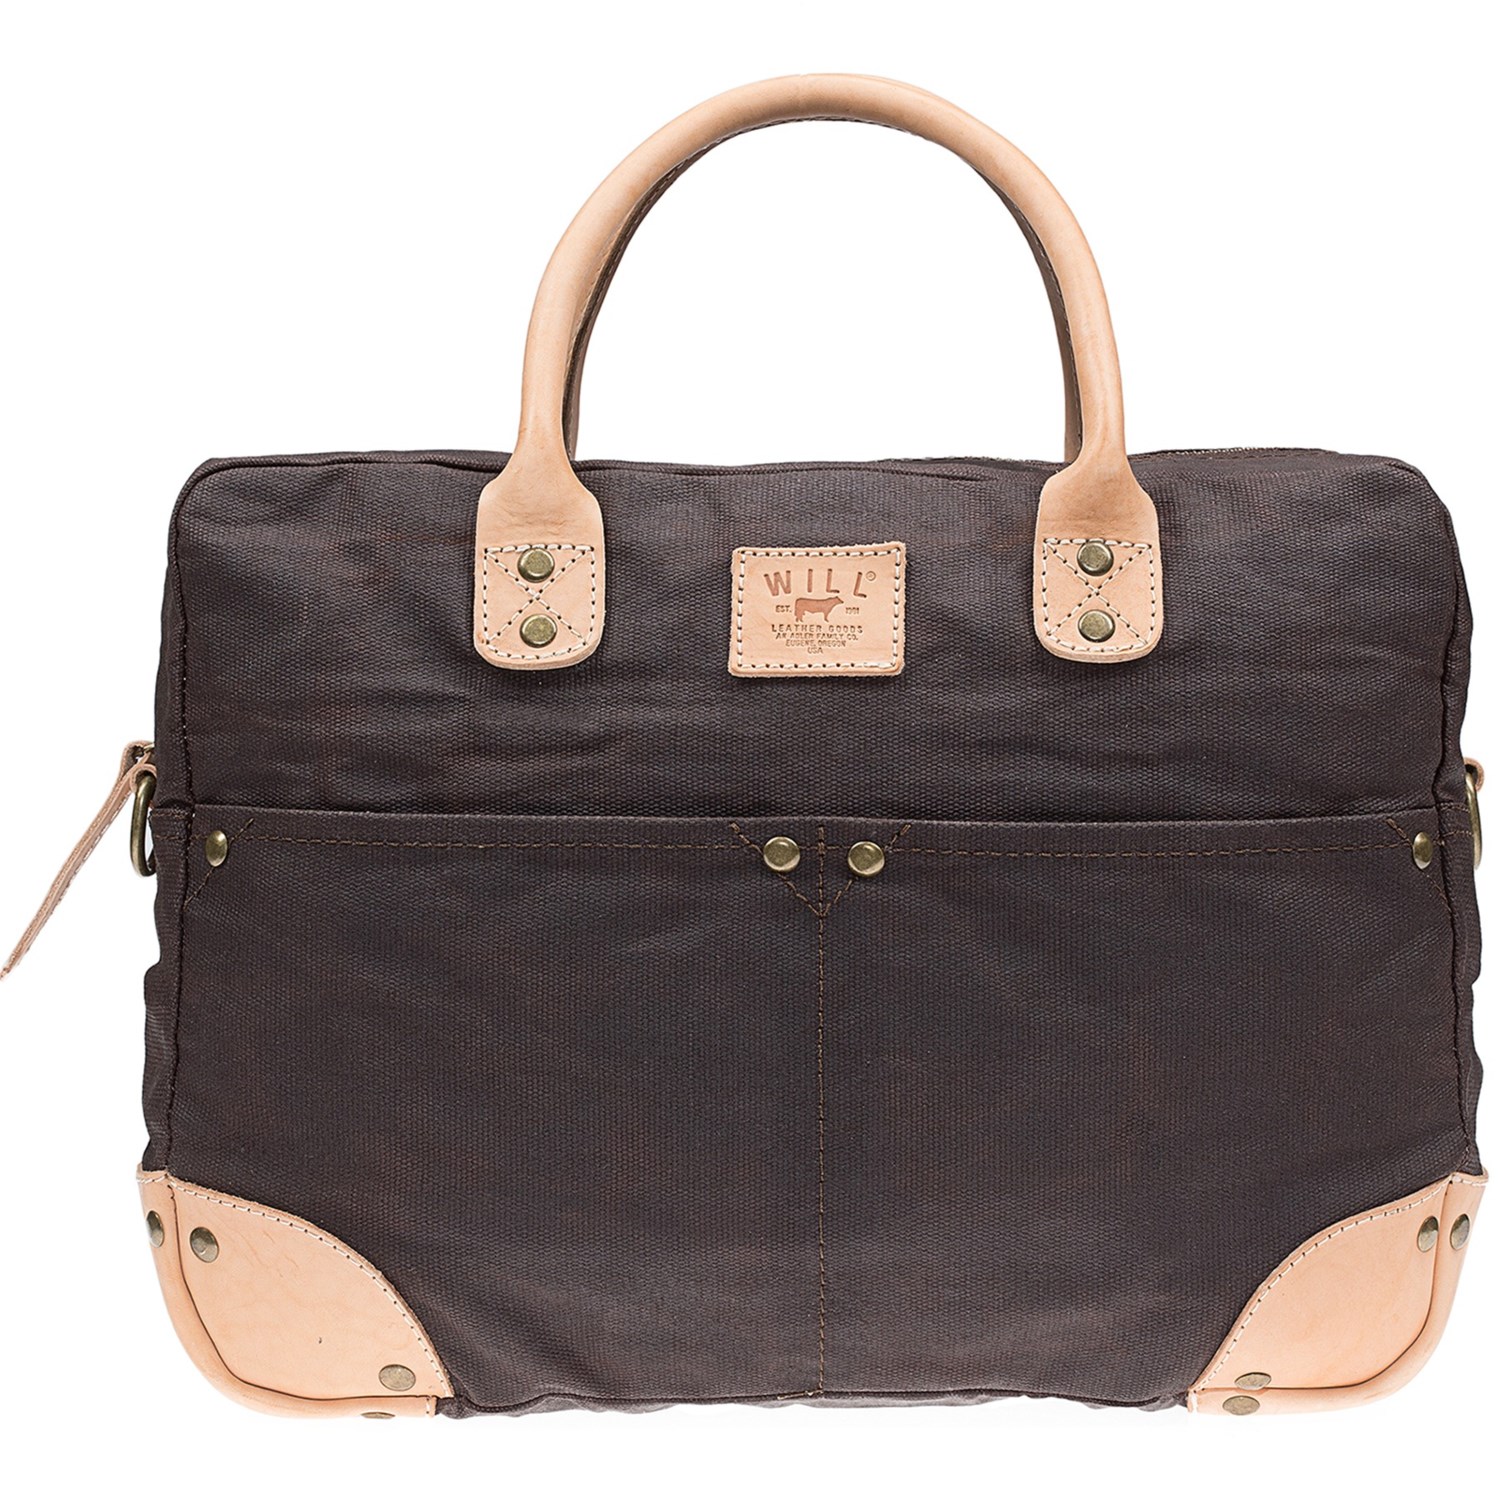 Will Leather Goods Flight Bag - Waxed Canvas, Laptop Sleeve - Save 70%